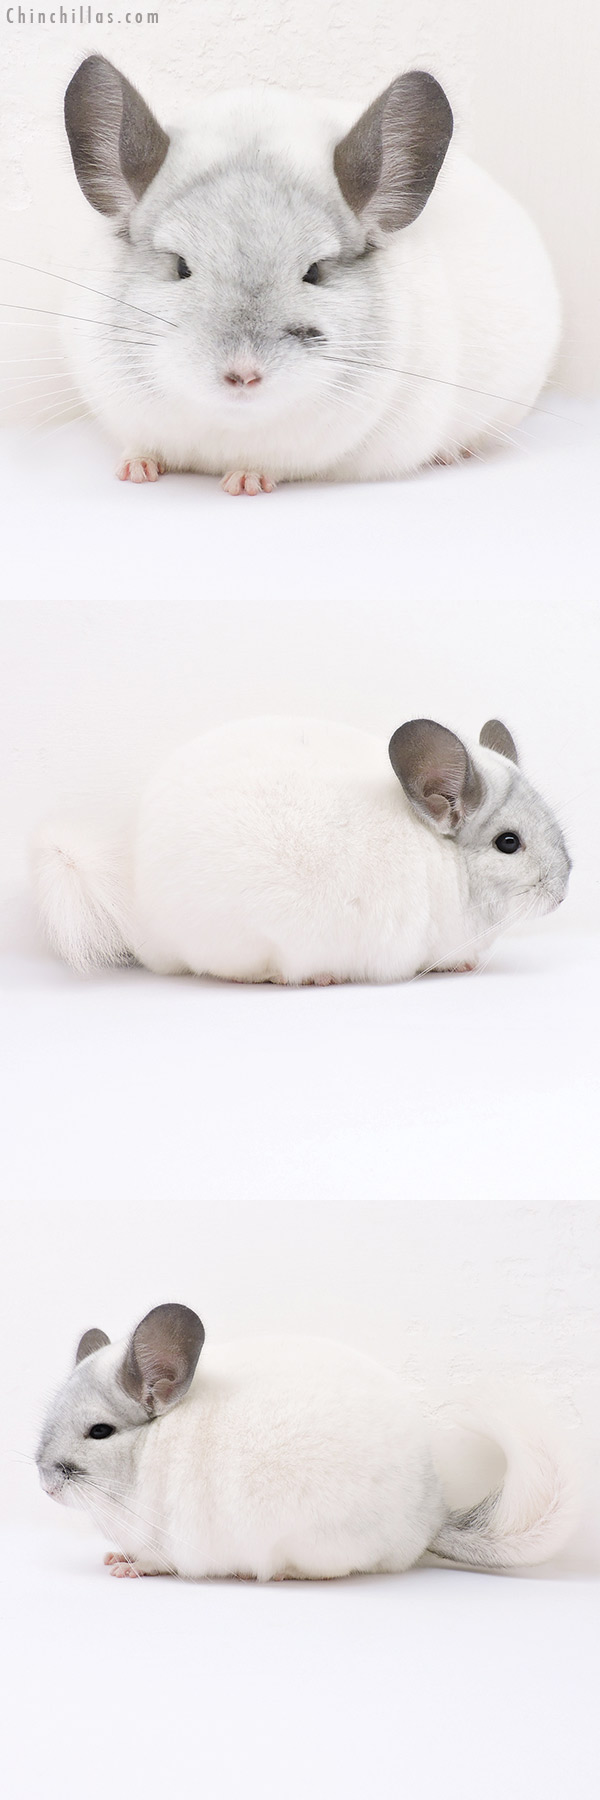 Chinchilla or related item offered for sale or export on Chinchillas.com - 16314 Herd Improvement Quality White Mosaic Male Chinchilla